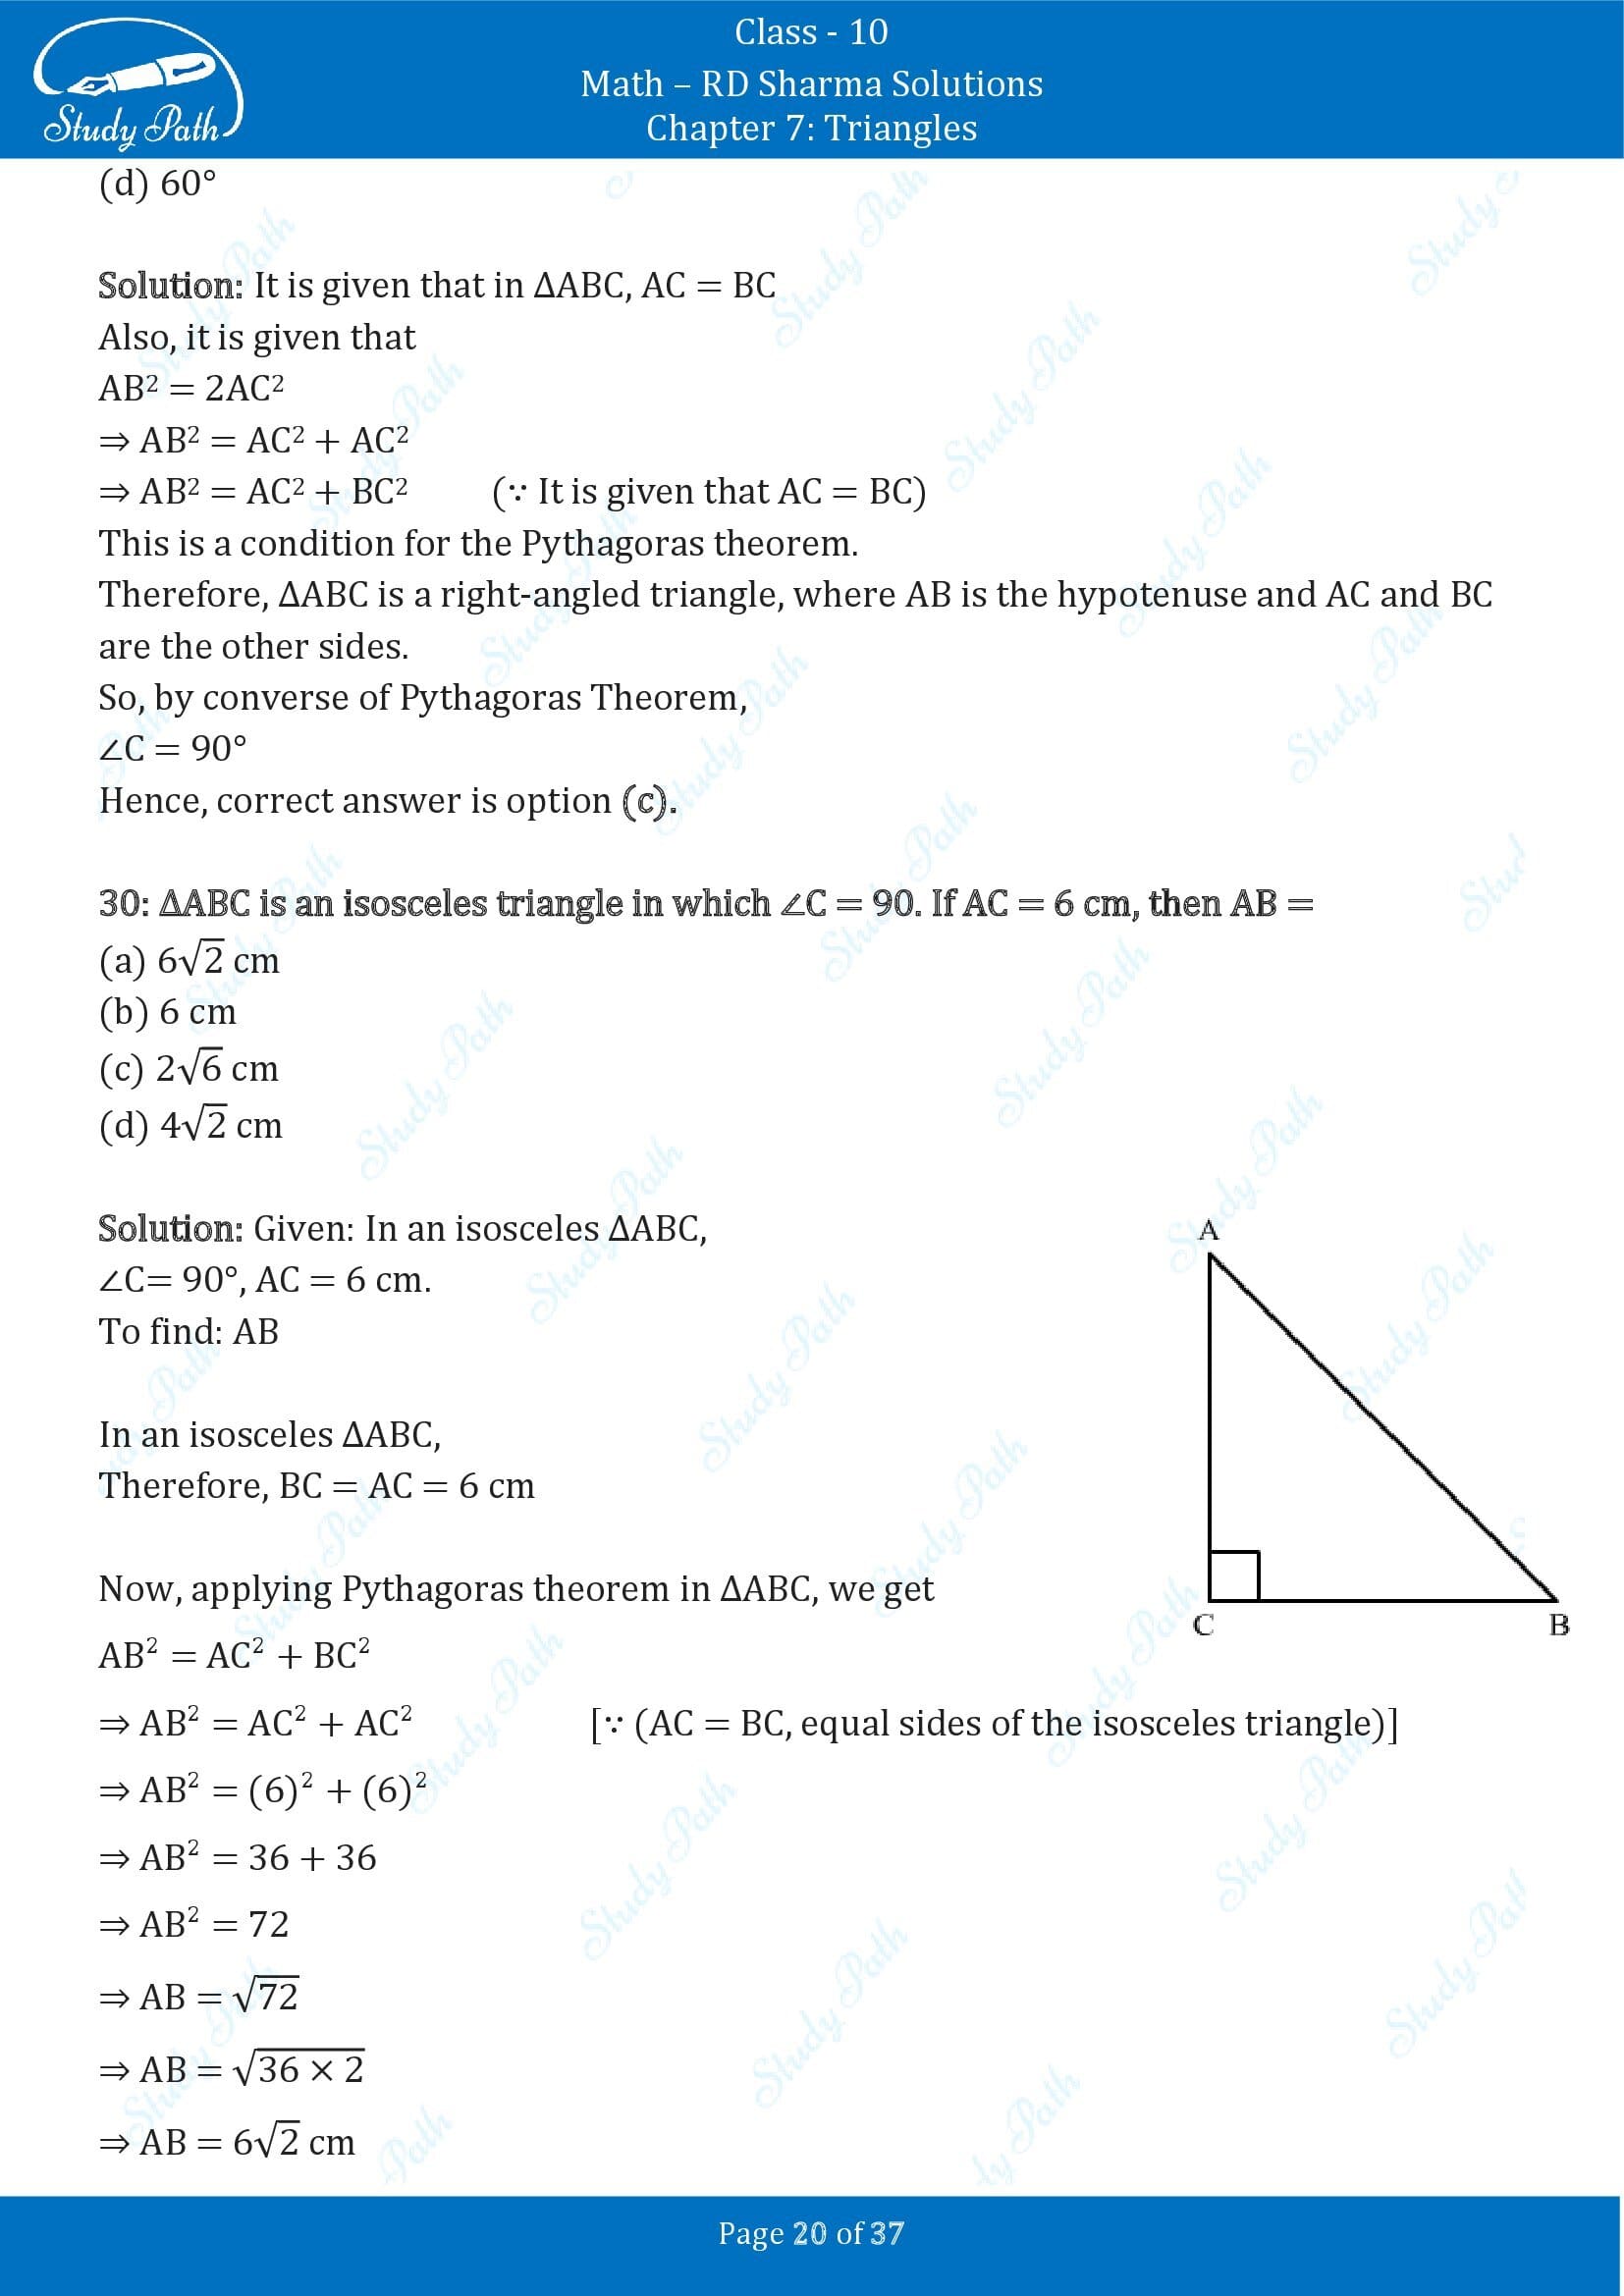 RD Sharma Solutions Class 10 Chapter 7 Triangles Multiple Choice Question MCQs 00020